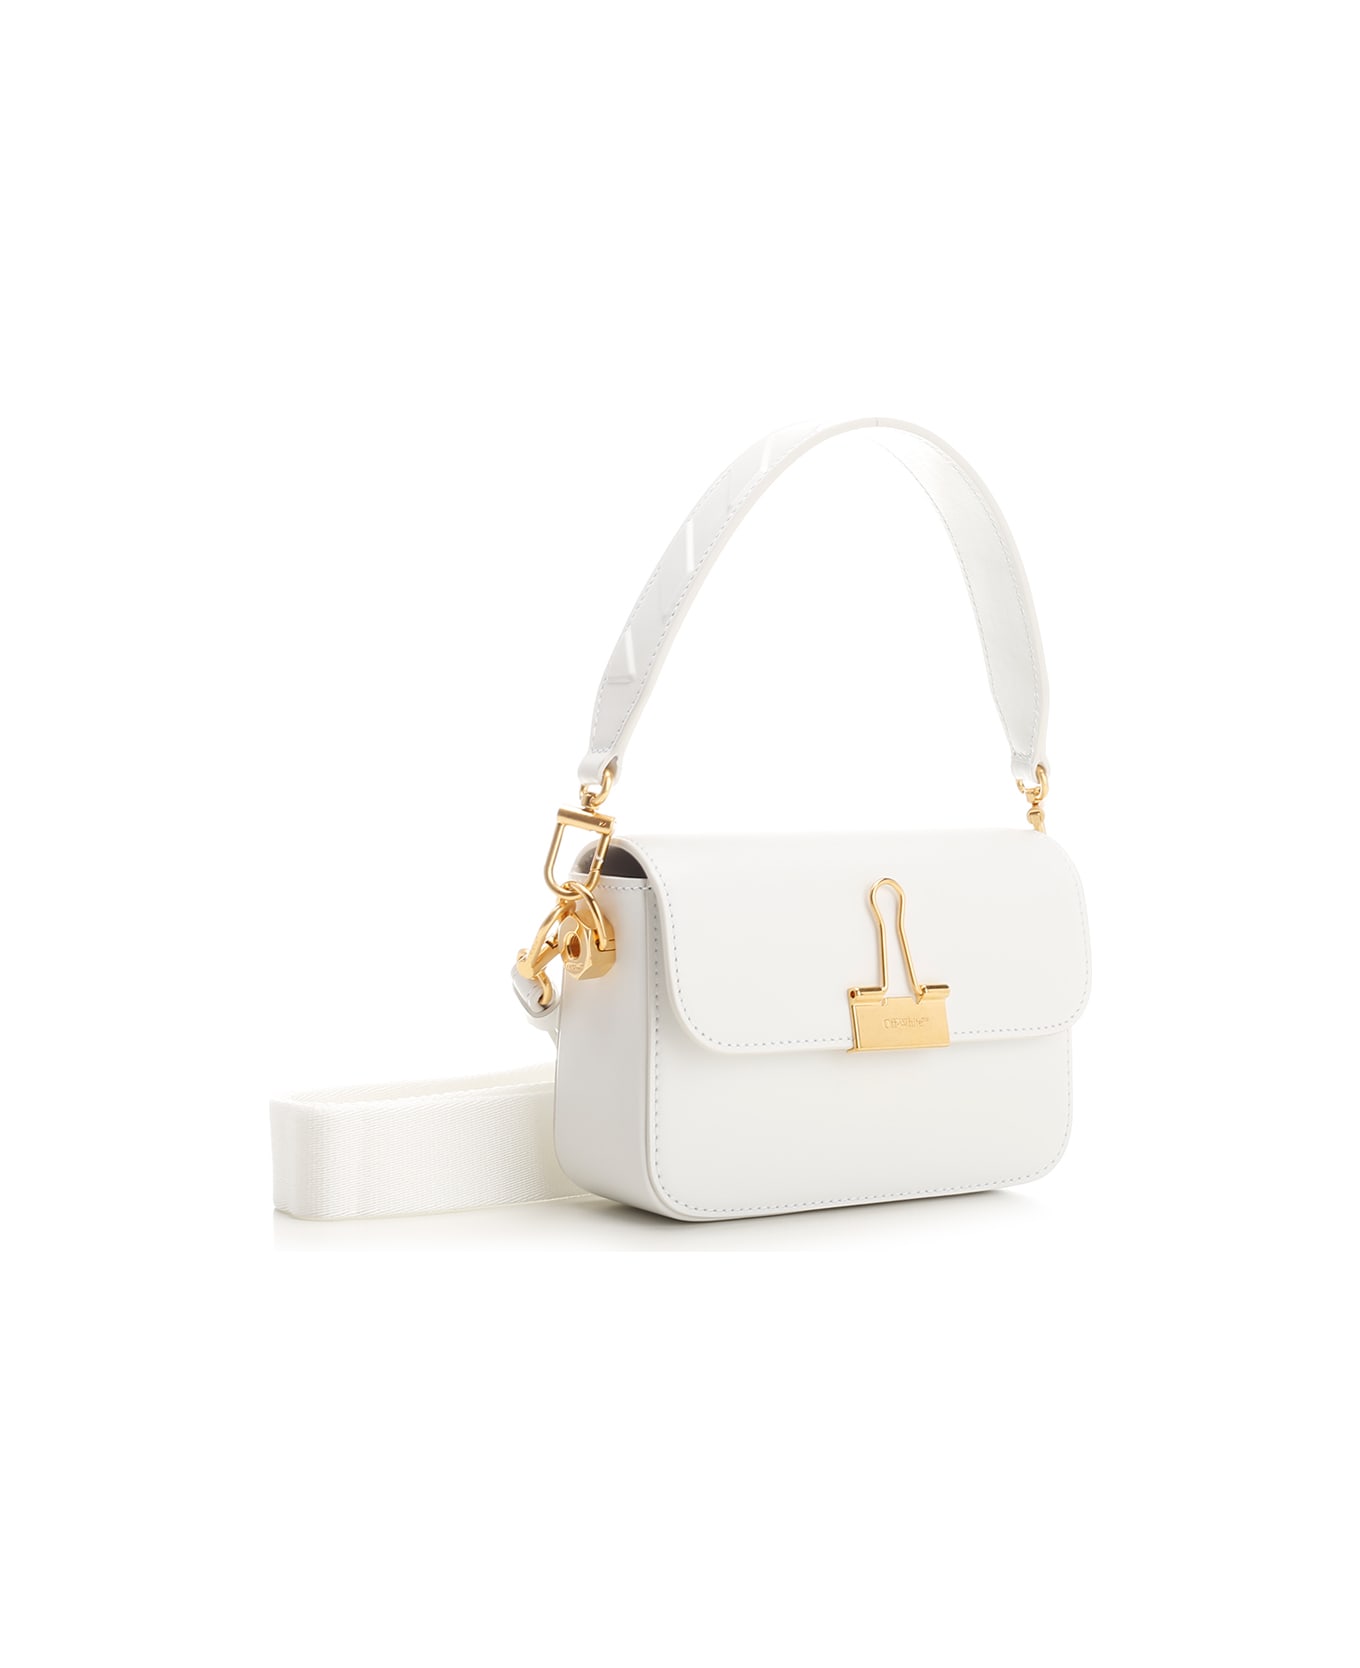 Off-White Small Leather Binder Bag - White